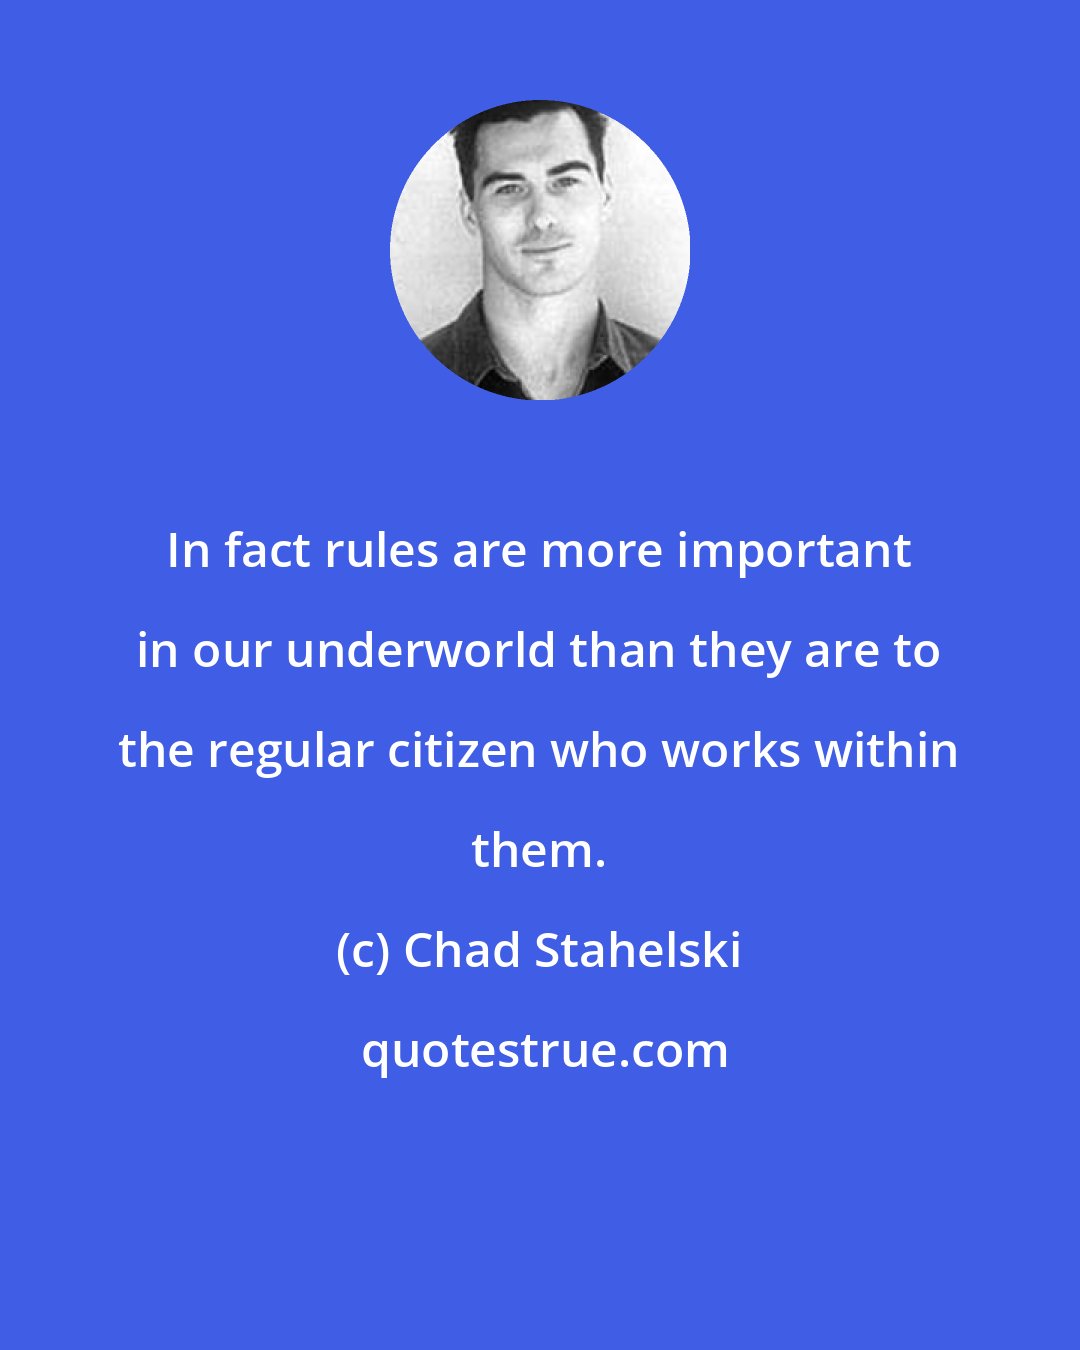 Chad Stahelski: In fact rules are more important in our underworld than they are to the regular citizen who works within them.